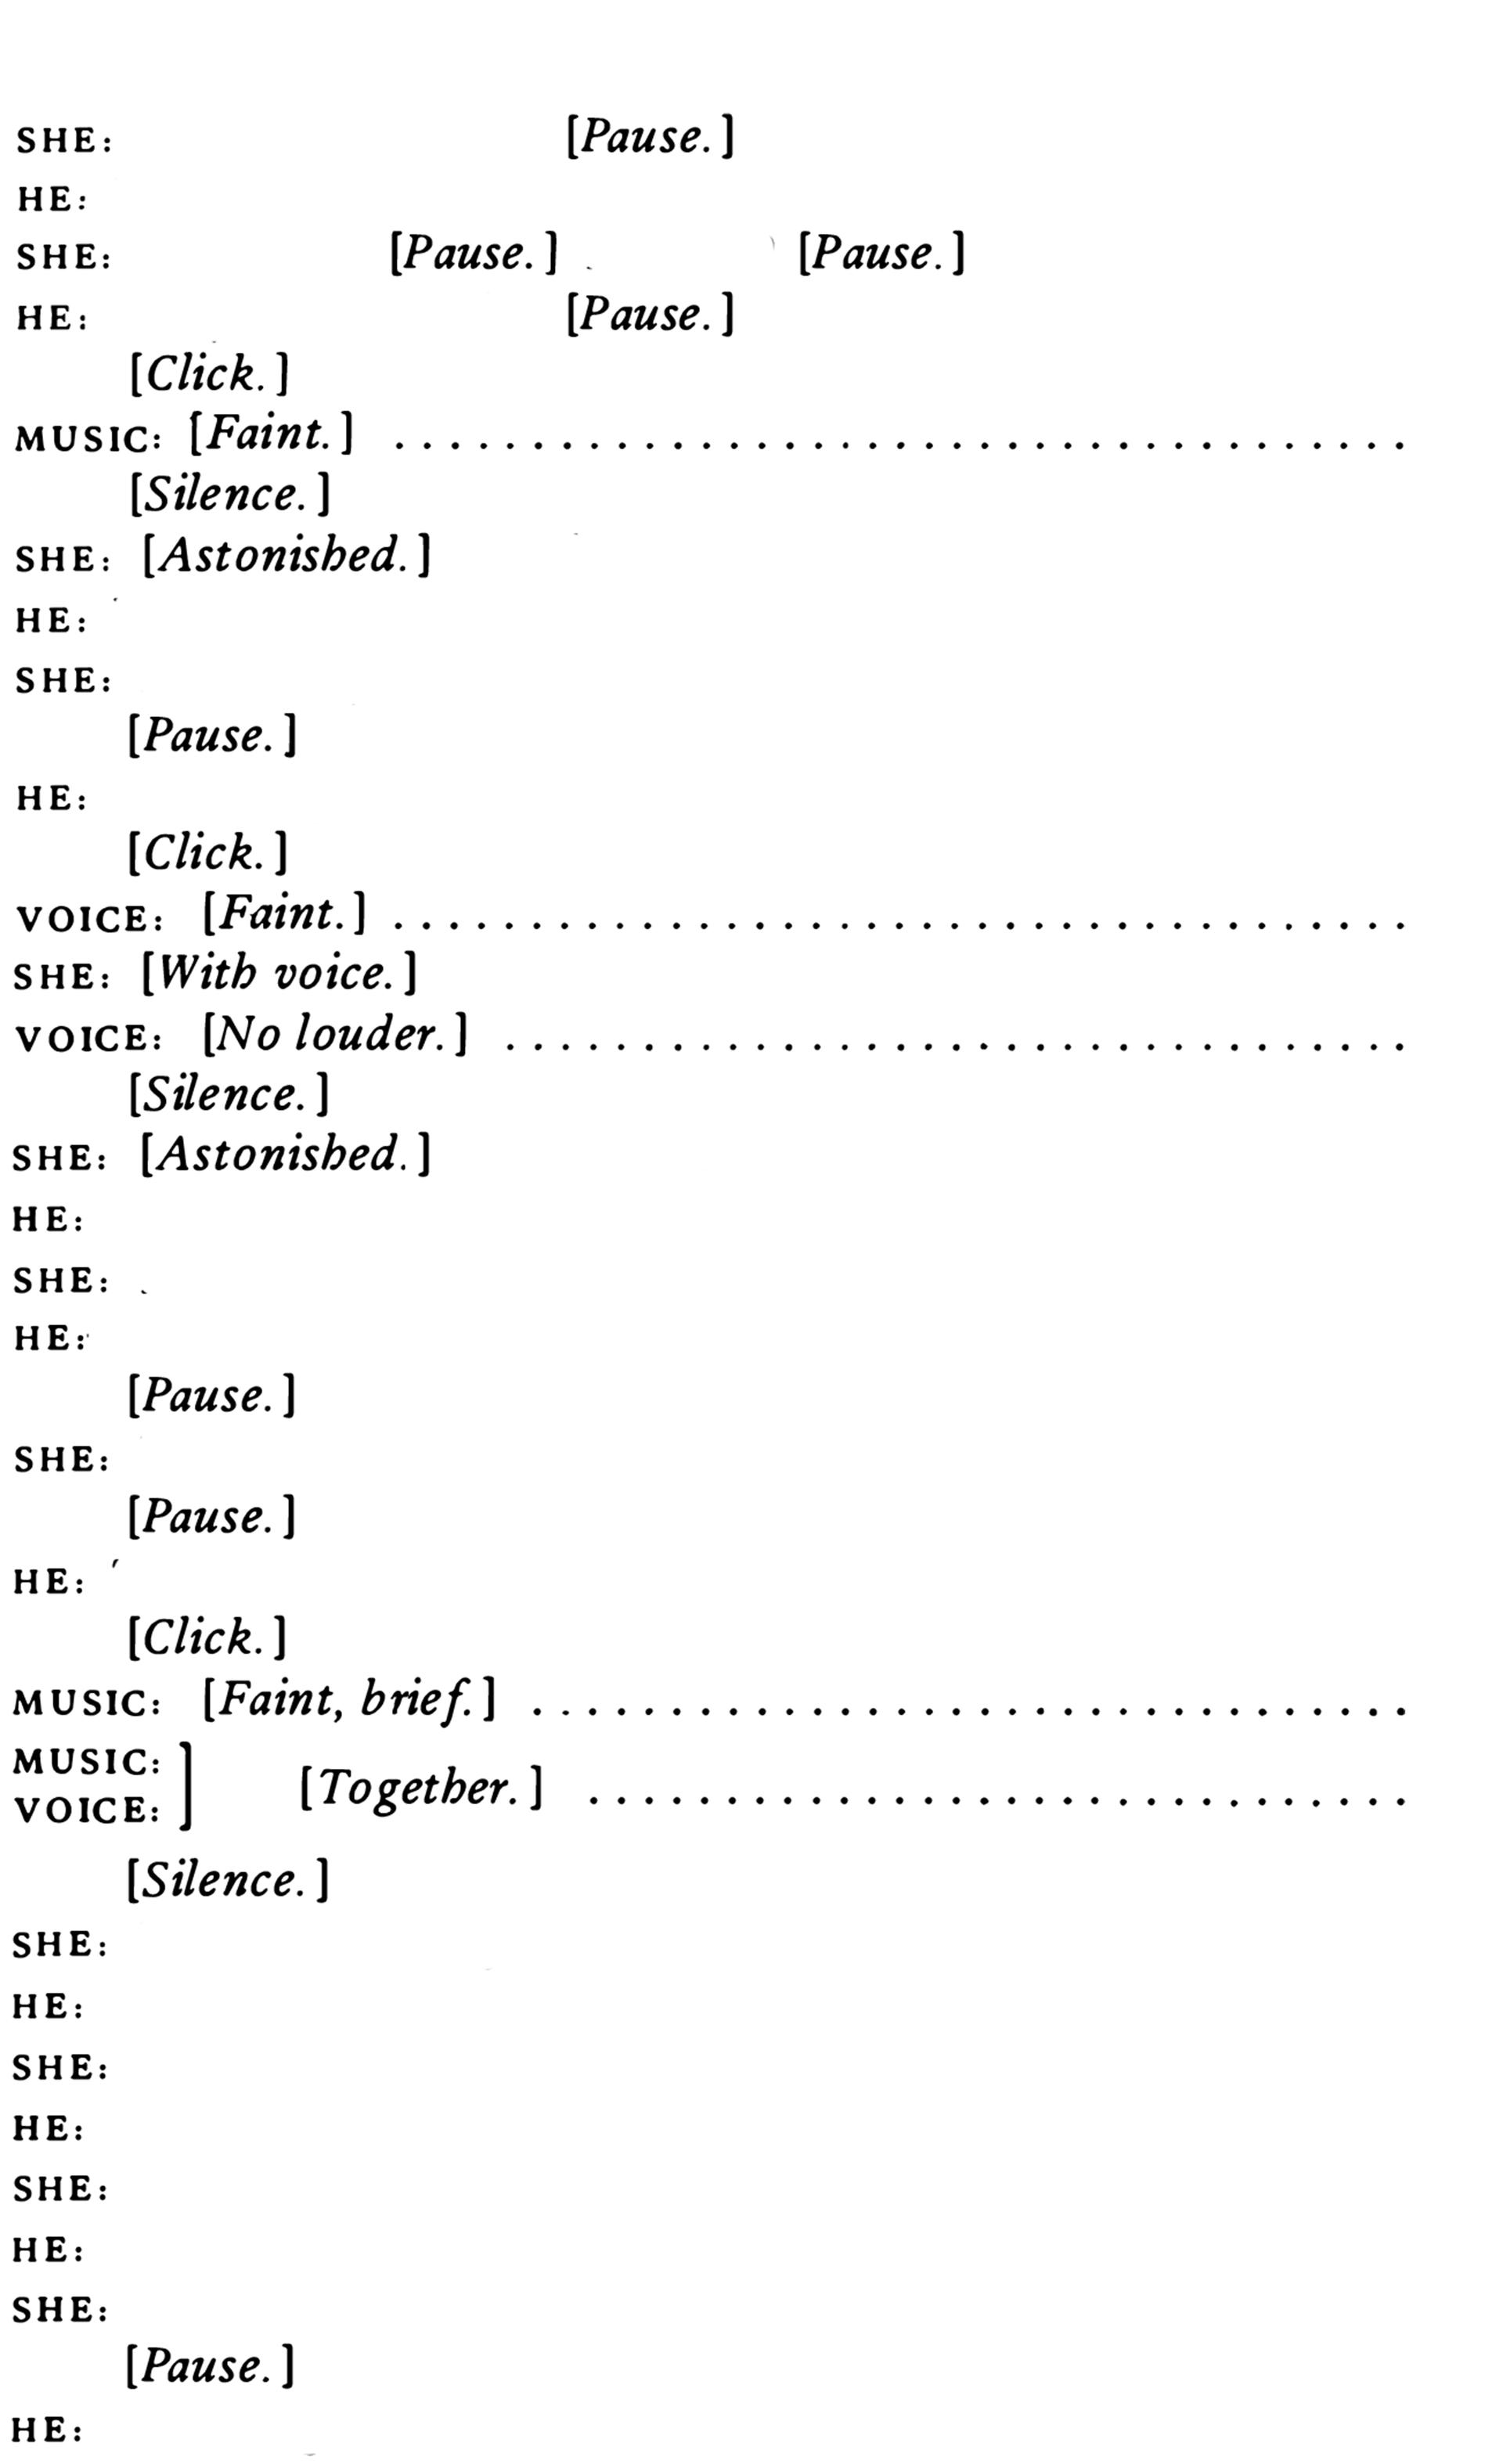 An excerpt of a theatre script that all the spoken lines are omitted.